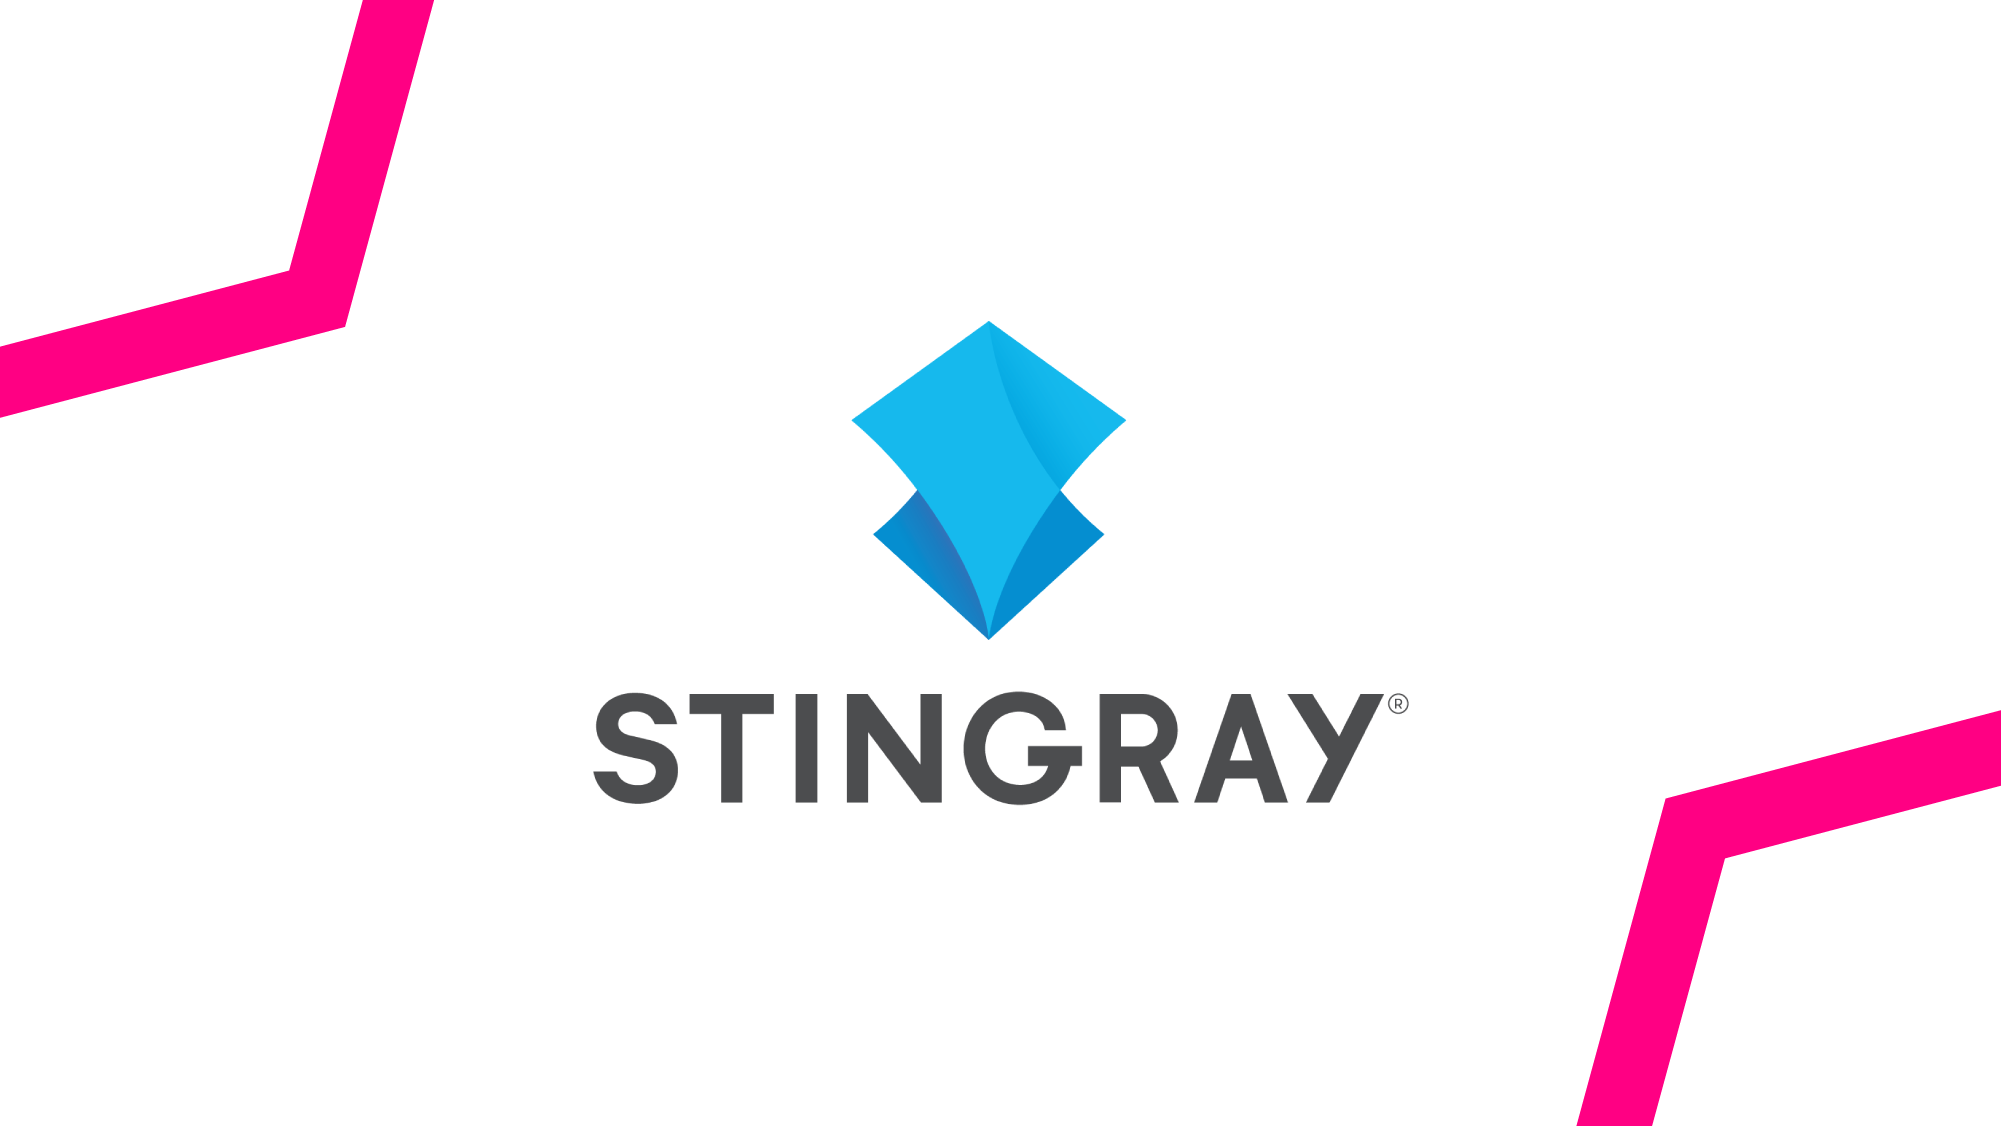 Stingray to leverage Hivestack’s suite of supply-side technology to power digital audio advertising in real time